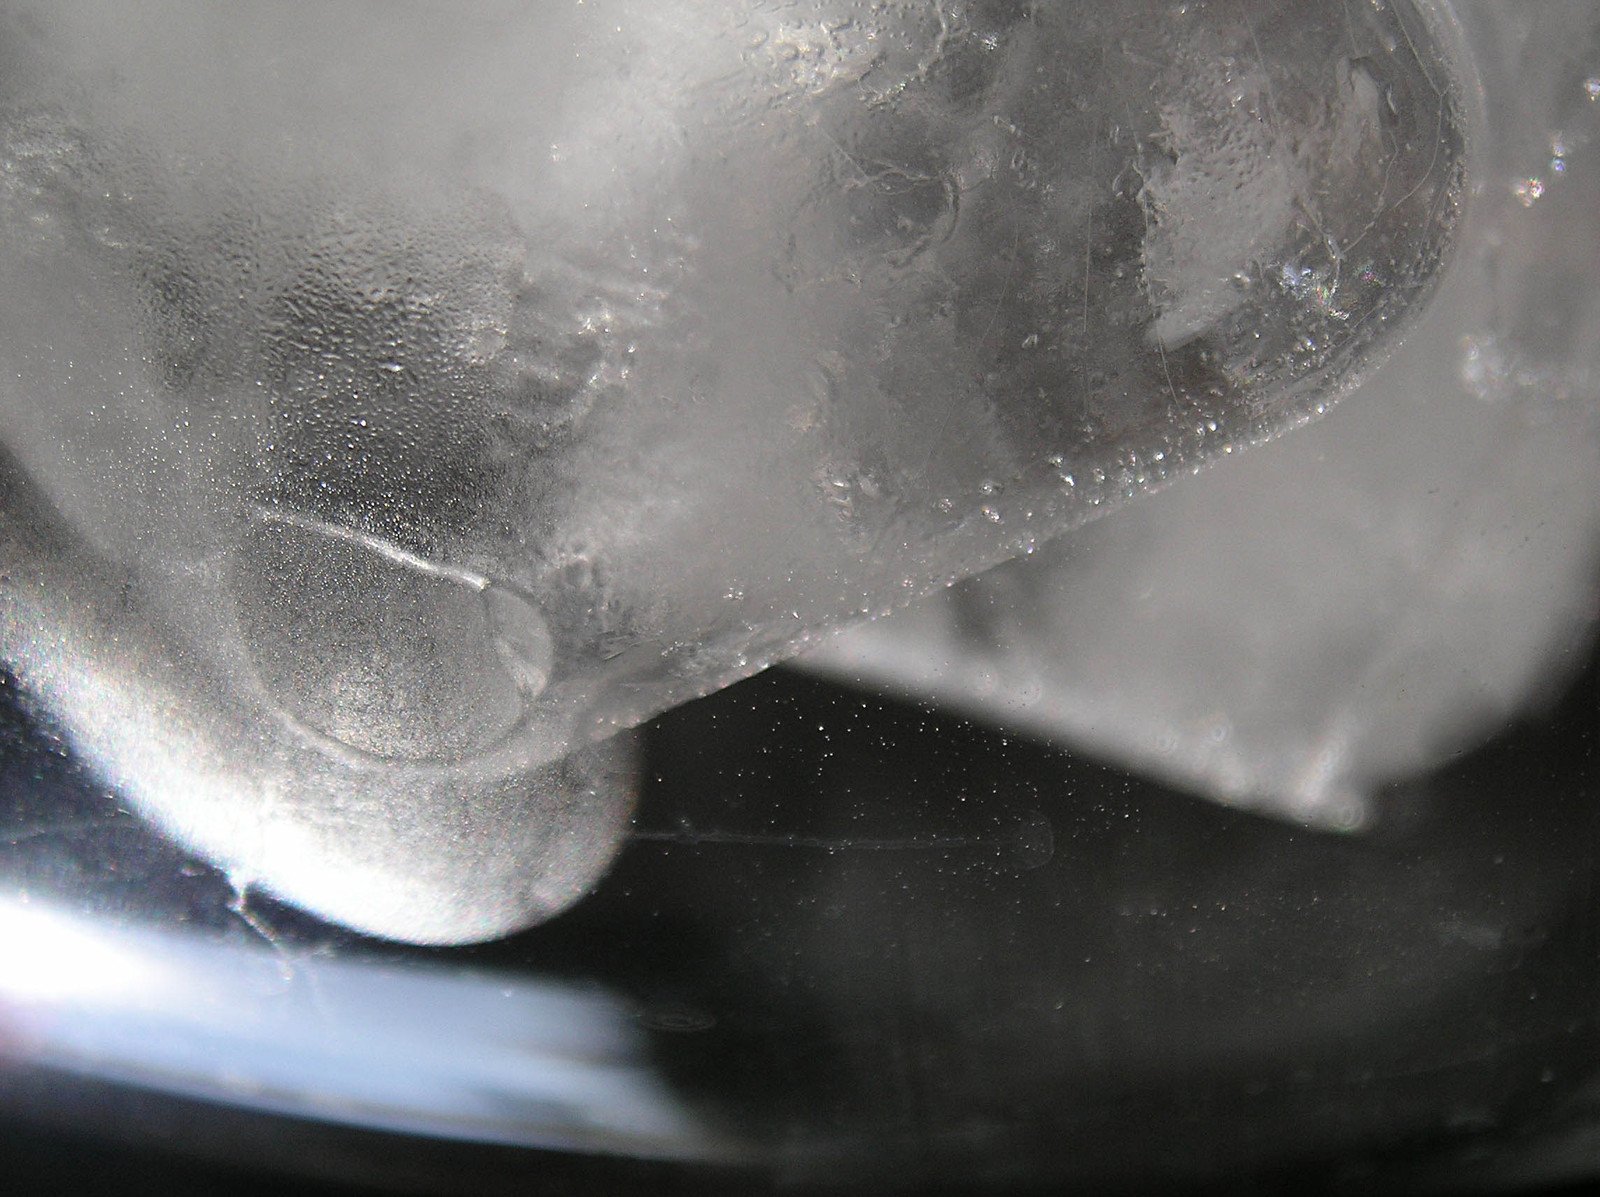 this is a close up s of a glass cup with boiling substance